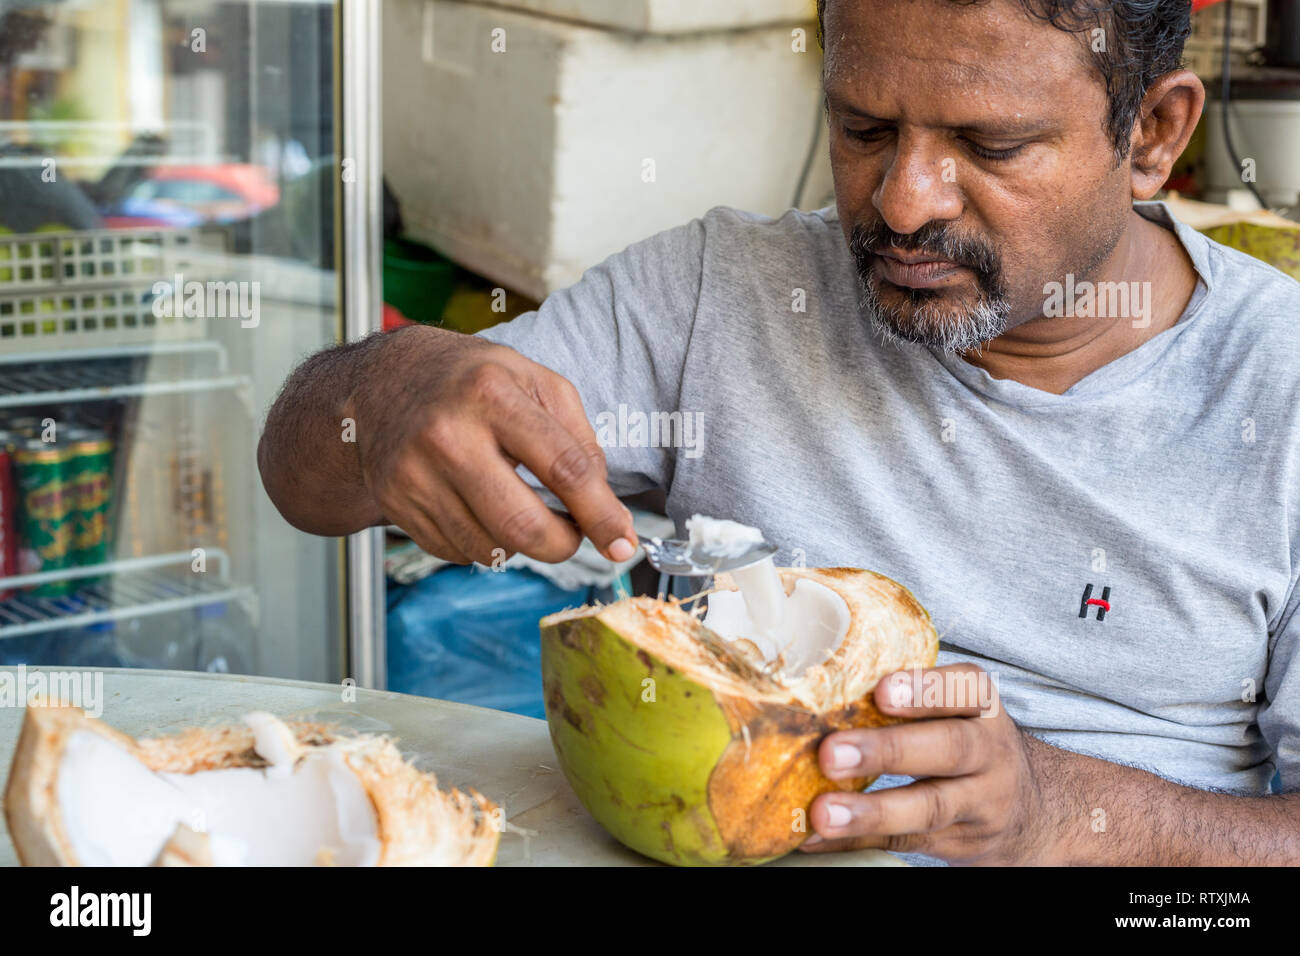 Man Eating Coconut Pulp after Drinking Coconut Water, Kuala Lumpur, Malaysia. Stock Photo